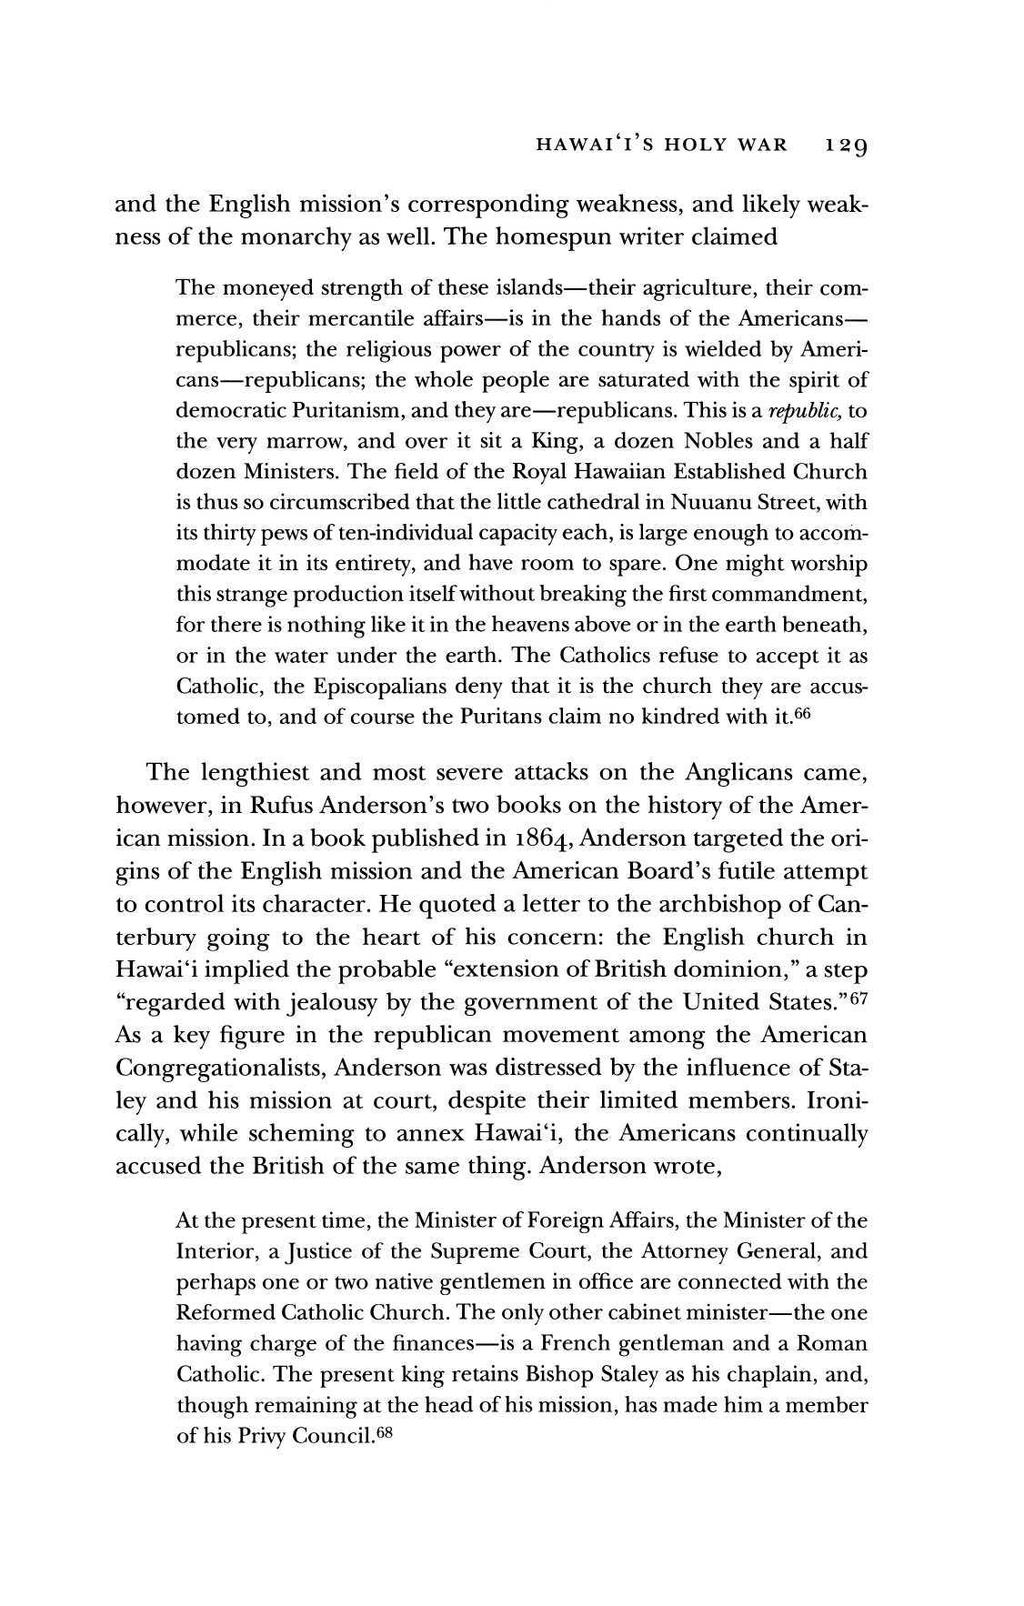 HAWAl'l S HOLY WAR 12O, and the English mission's corresponding weakness, and likely weakness of the monarchy as well.